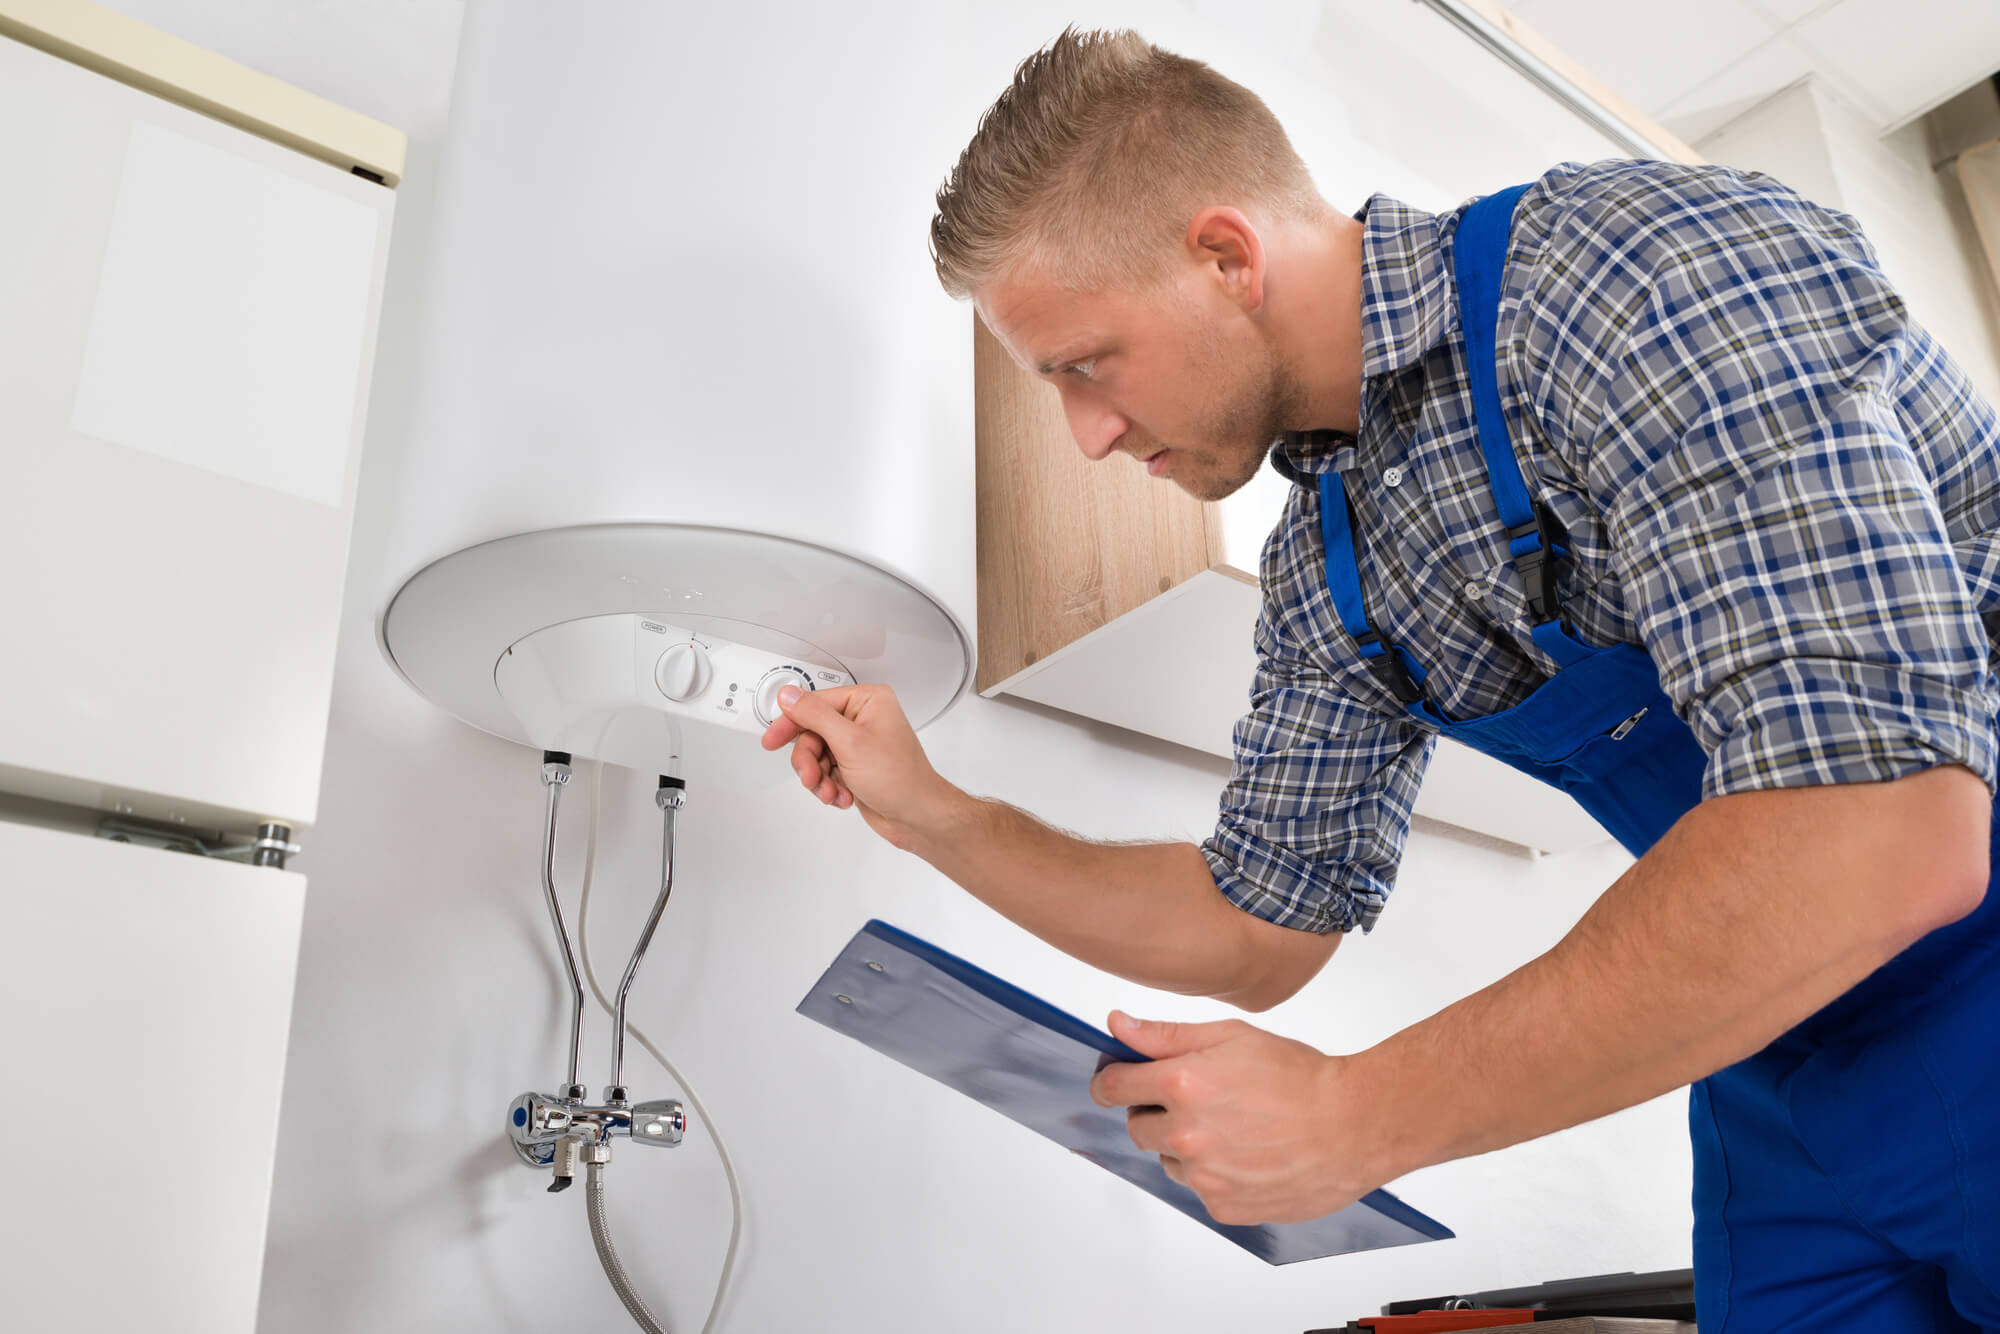 Can I install a water heater by myself?